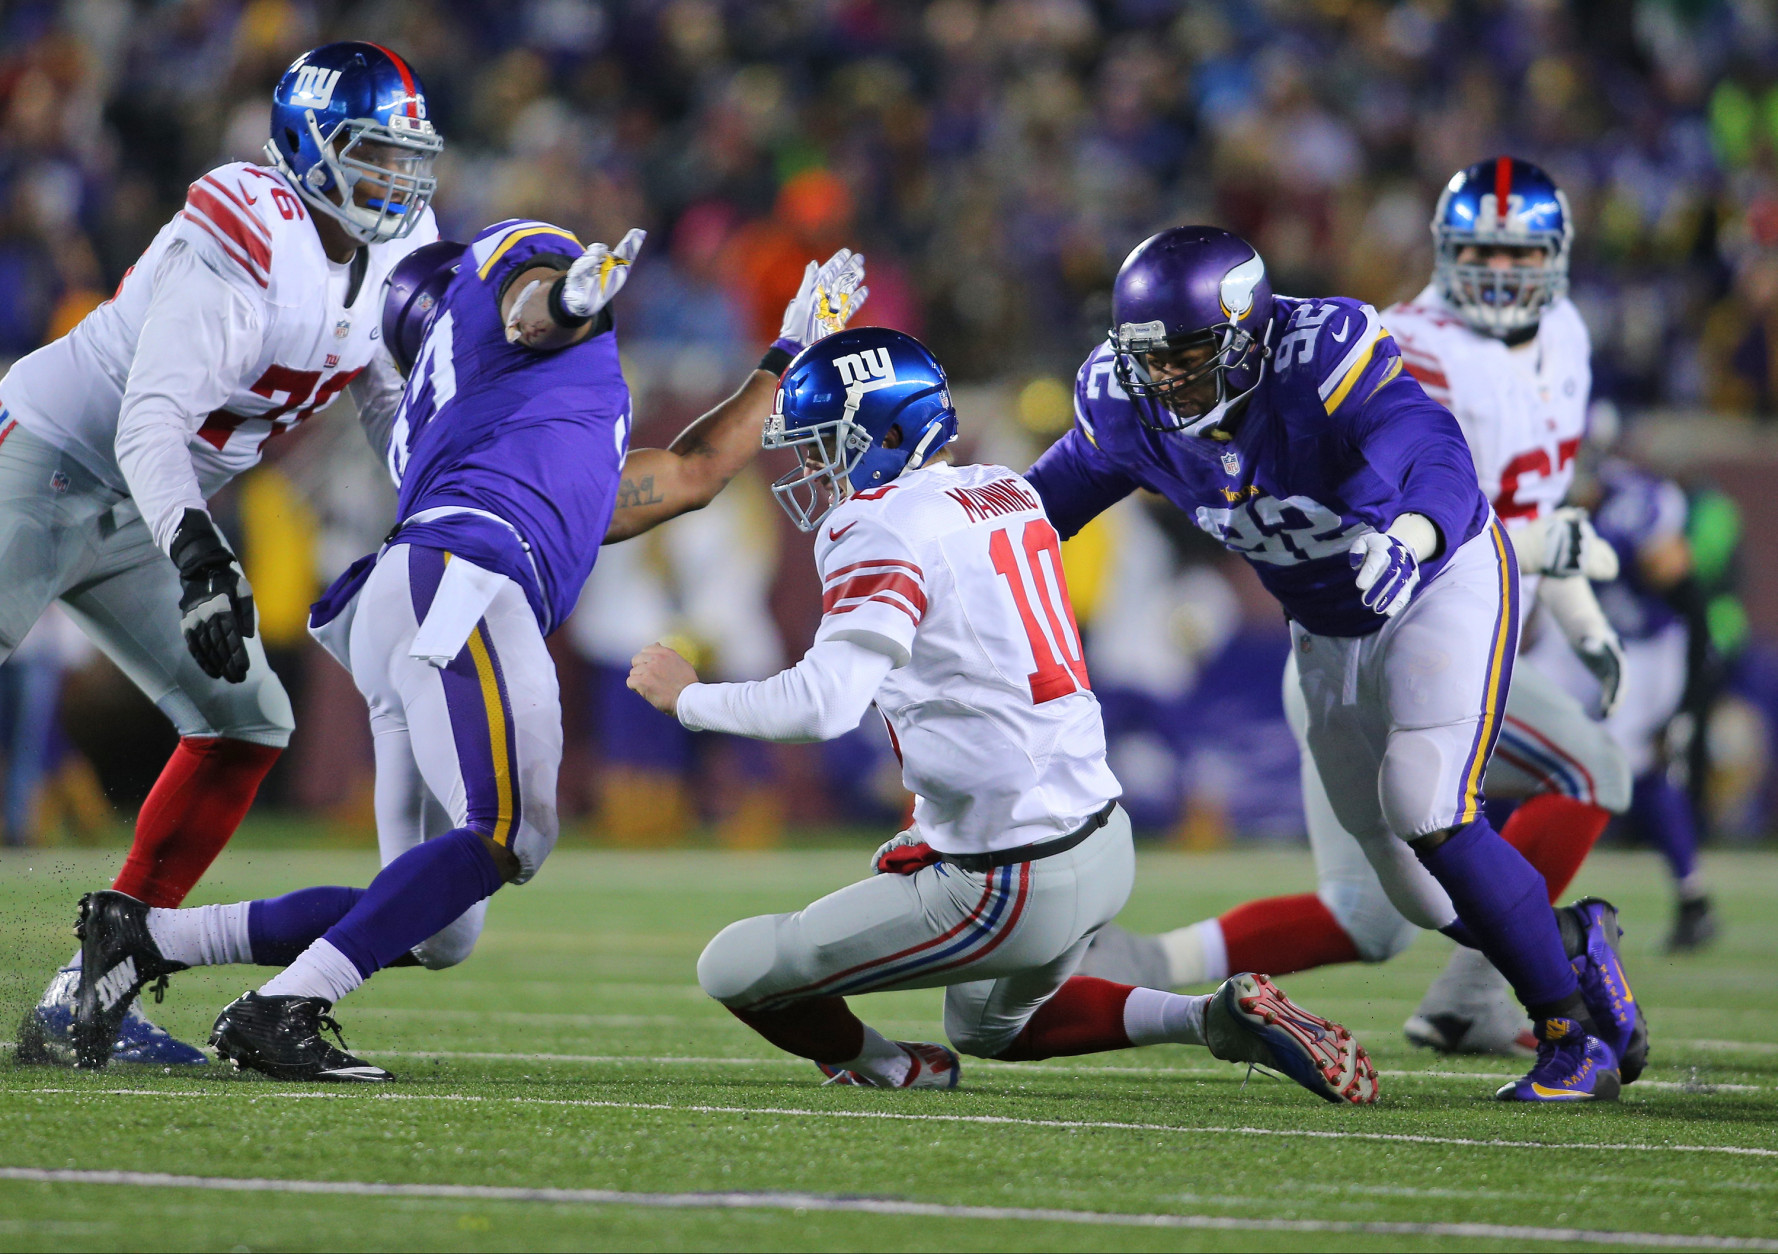 MINNEAPOLIS, MN - DECEMBER 27:  Eli Manning #10 of the New York Giants takes a dive while Everson Griffen #97 and Tom Johnson #92 of the Minnesota Vikings go for the tackle in the second quarter on December 27, 2015 at TCF Bank Stadium in Minneapolis, Minnesota. (Photo by Adam Bettcher/Getty Images)